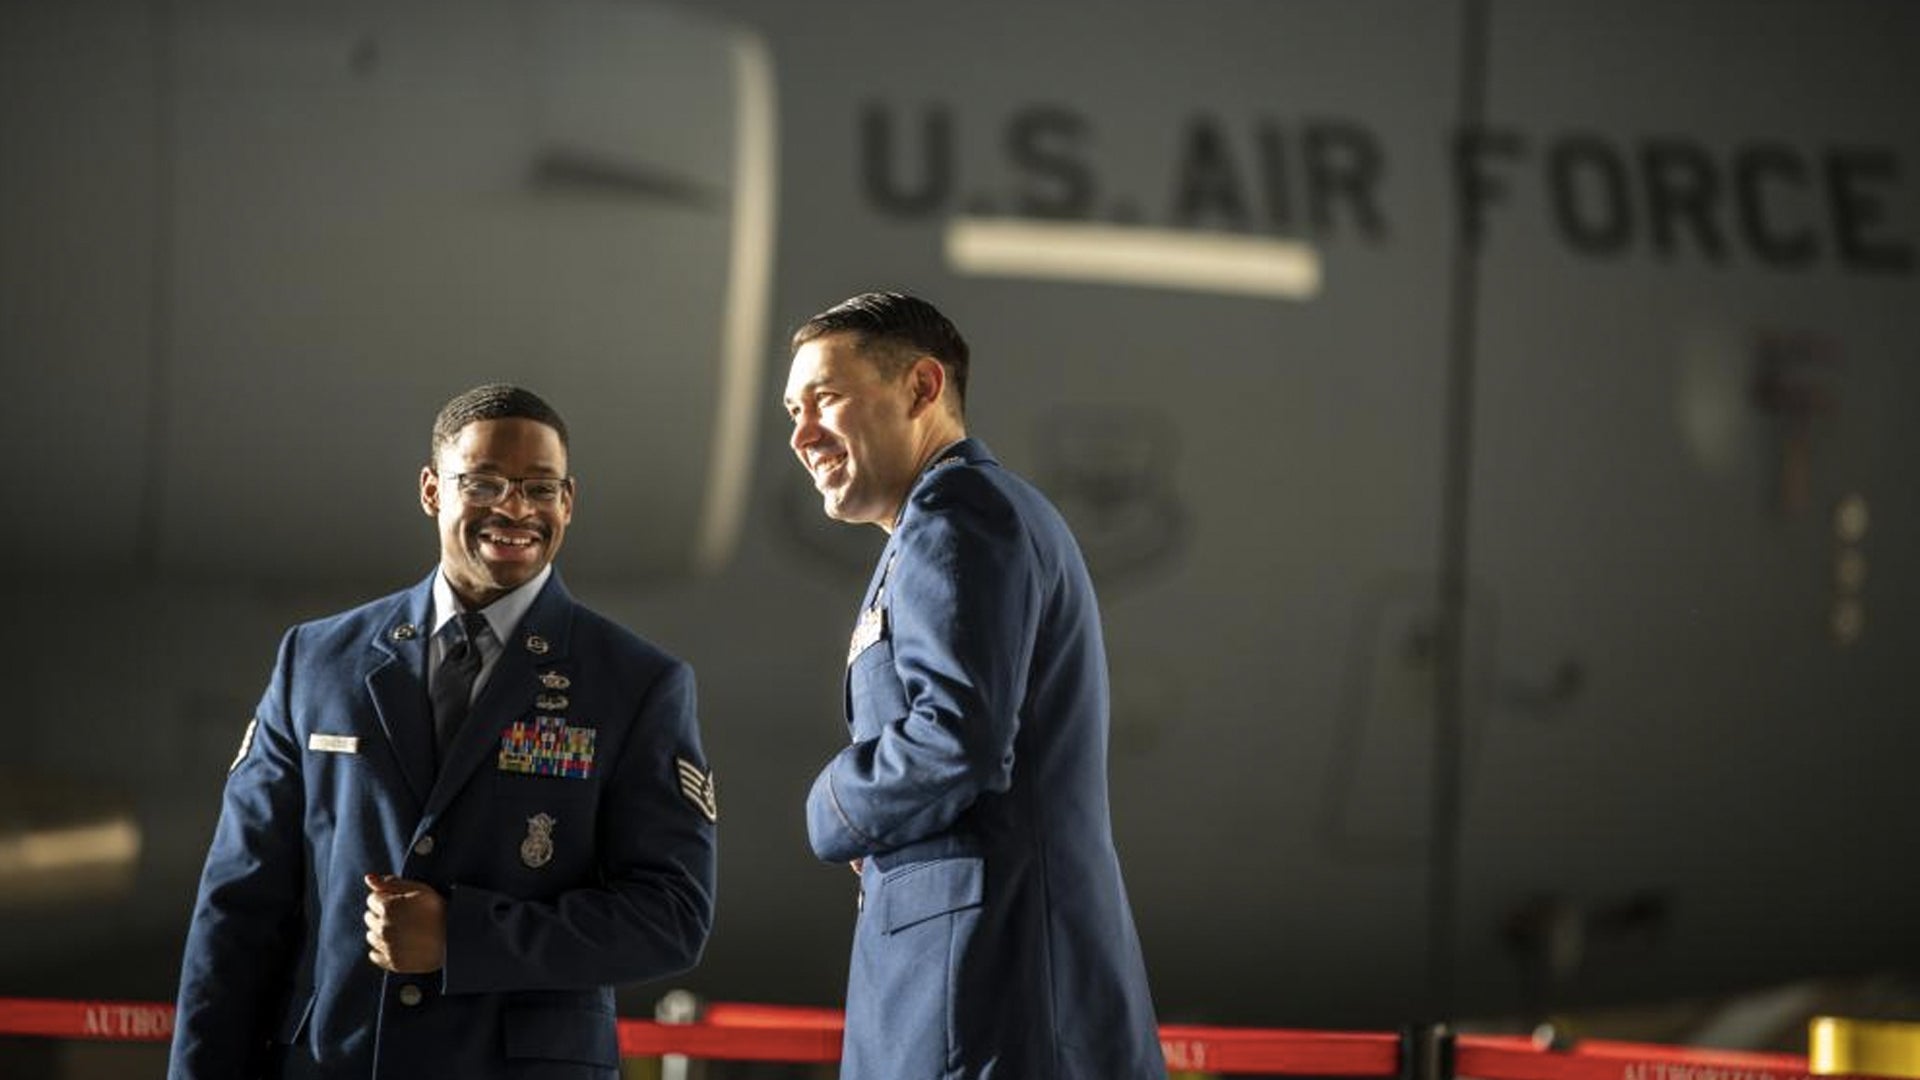 U.S. Air Force Staff Sgt. E-Quantay Mason, left, Phoenix Raven with REACH 651, and Maj. Drew Dela Cruz, C-17 pilot and REACH 651 aircraft commander, share a moment before receiving the Distinguished Flying Cross from Maj. Gen. Corey Martin, 18th Air Force commander, at Travis Air Force Base, California, Dec. 9, 2022. (Nicholas Pilch/U.S. Air Force) 